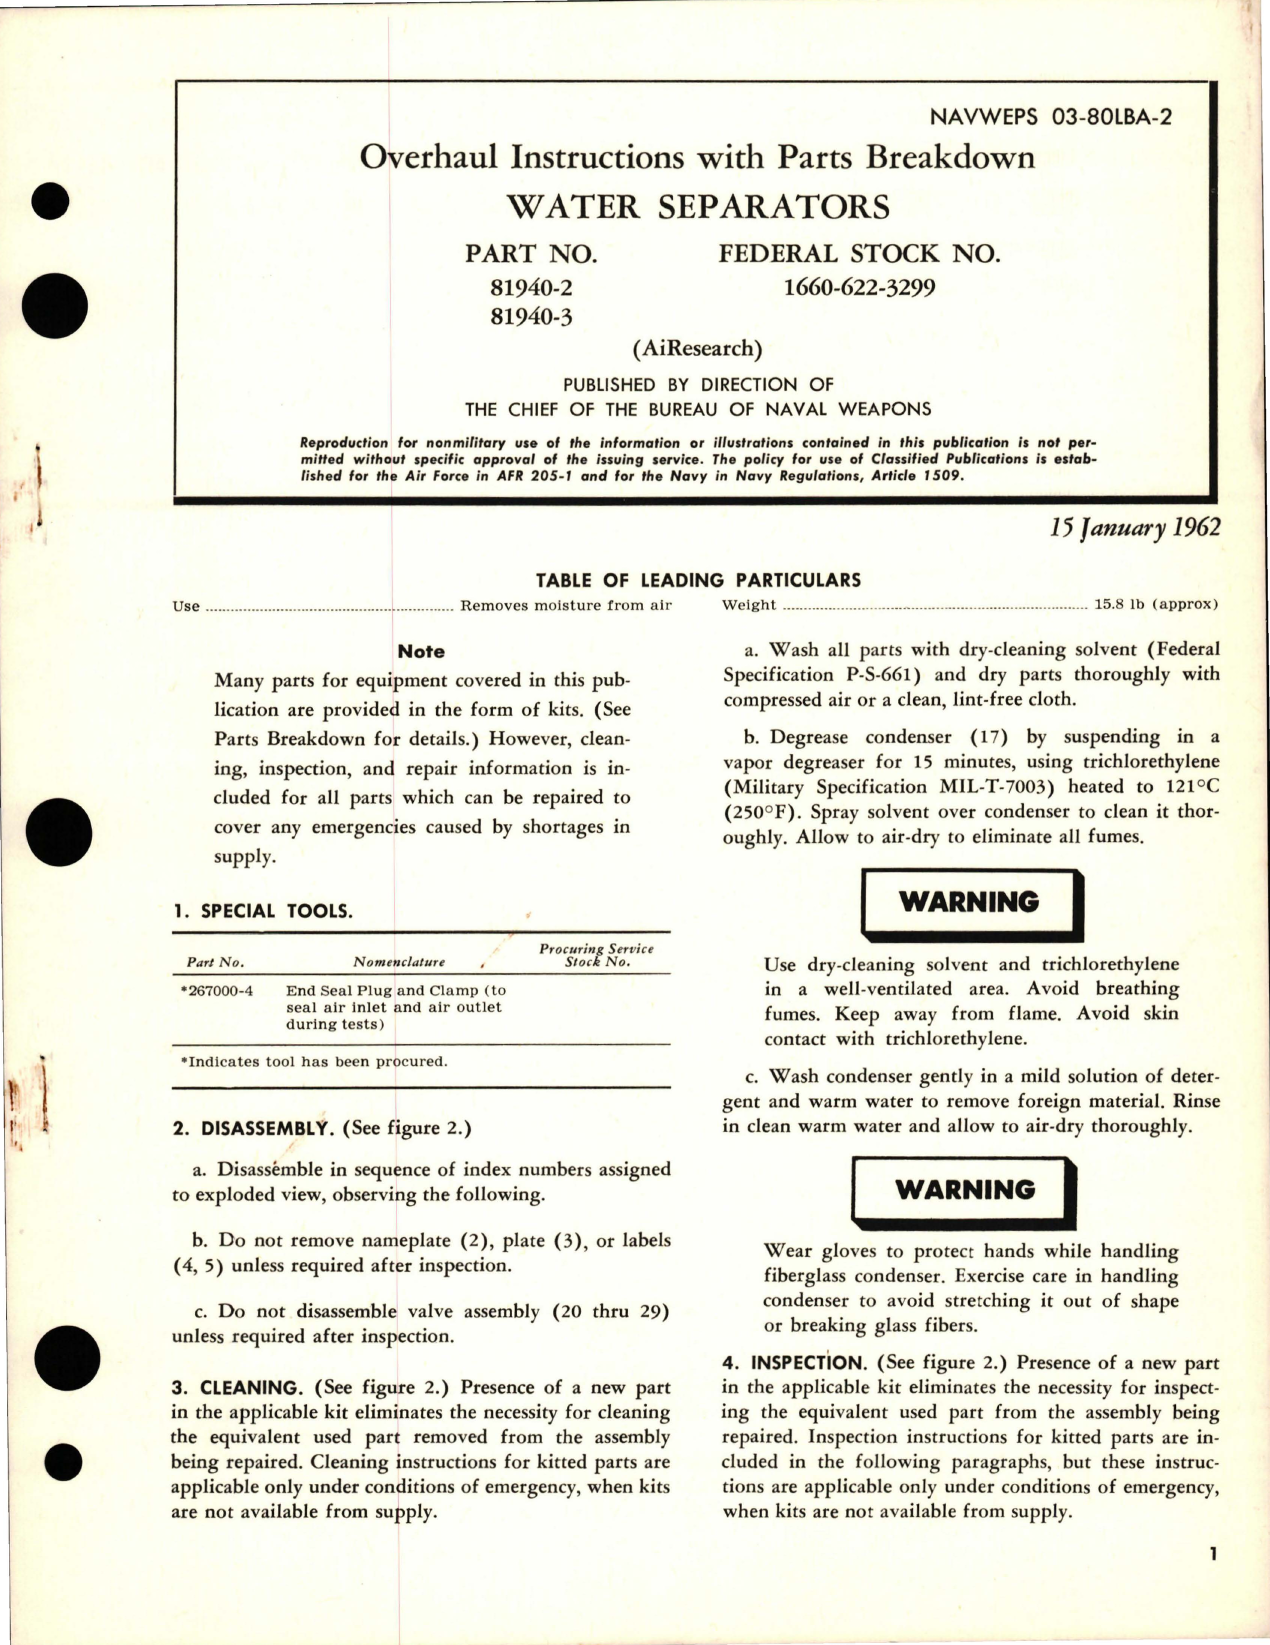 Sample page 1 from AirCorps Library document: Overhaul Instructions with Parts Breakdown for Water Separators - Parts 81940-2 and 81940-3 